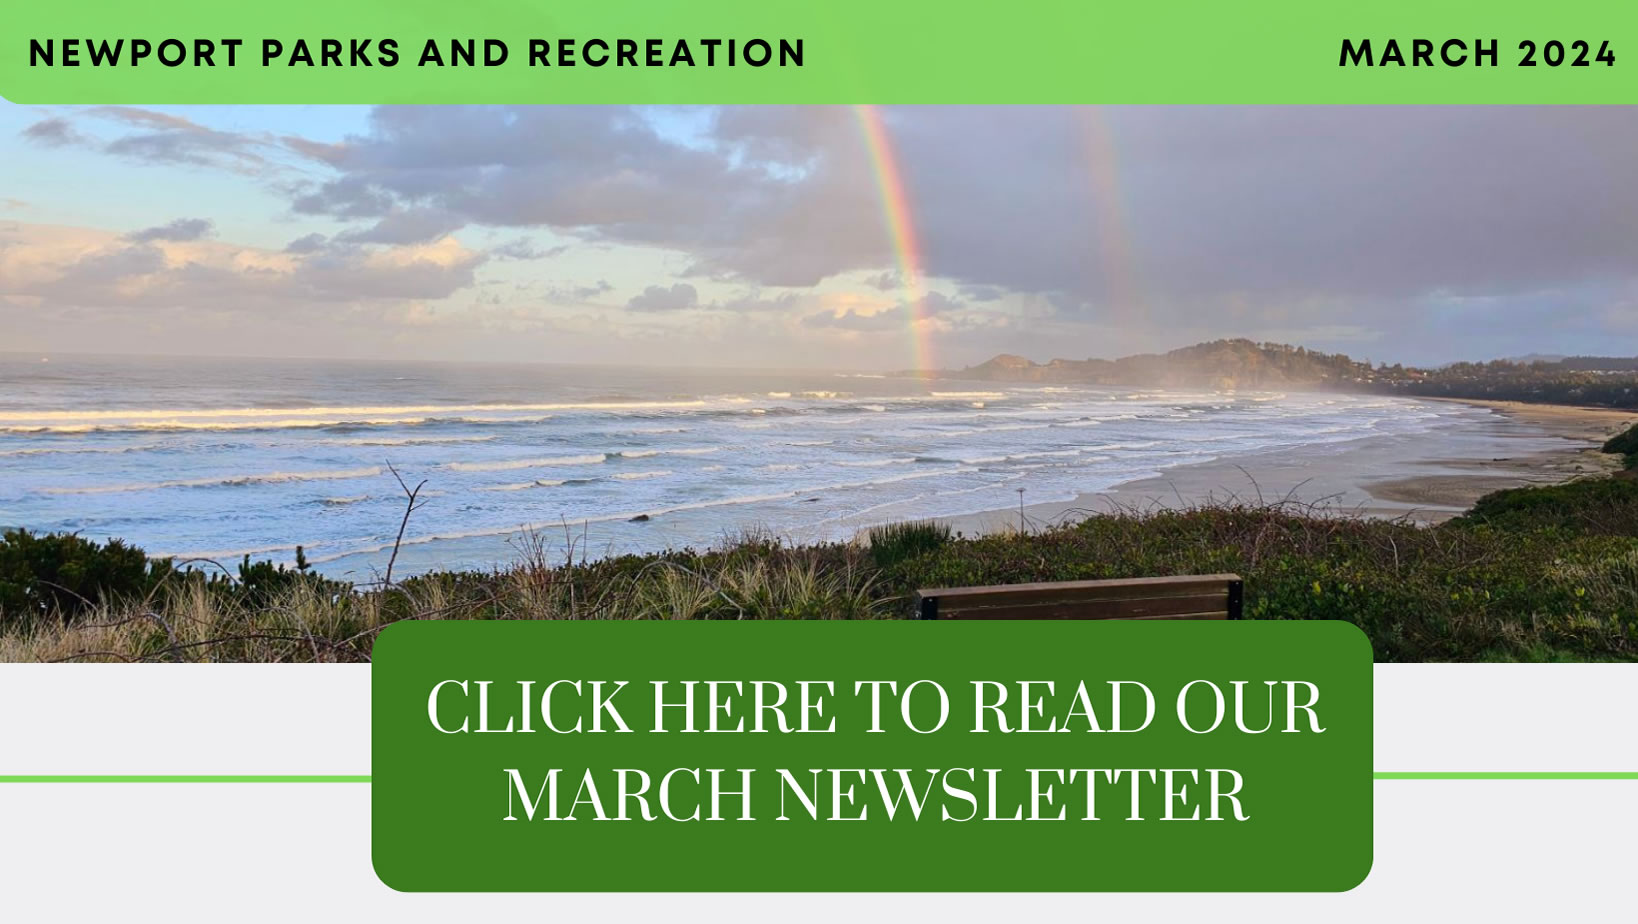 click here to read the March newsletter